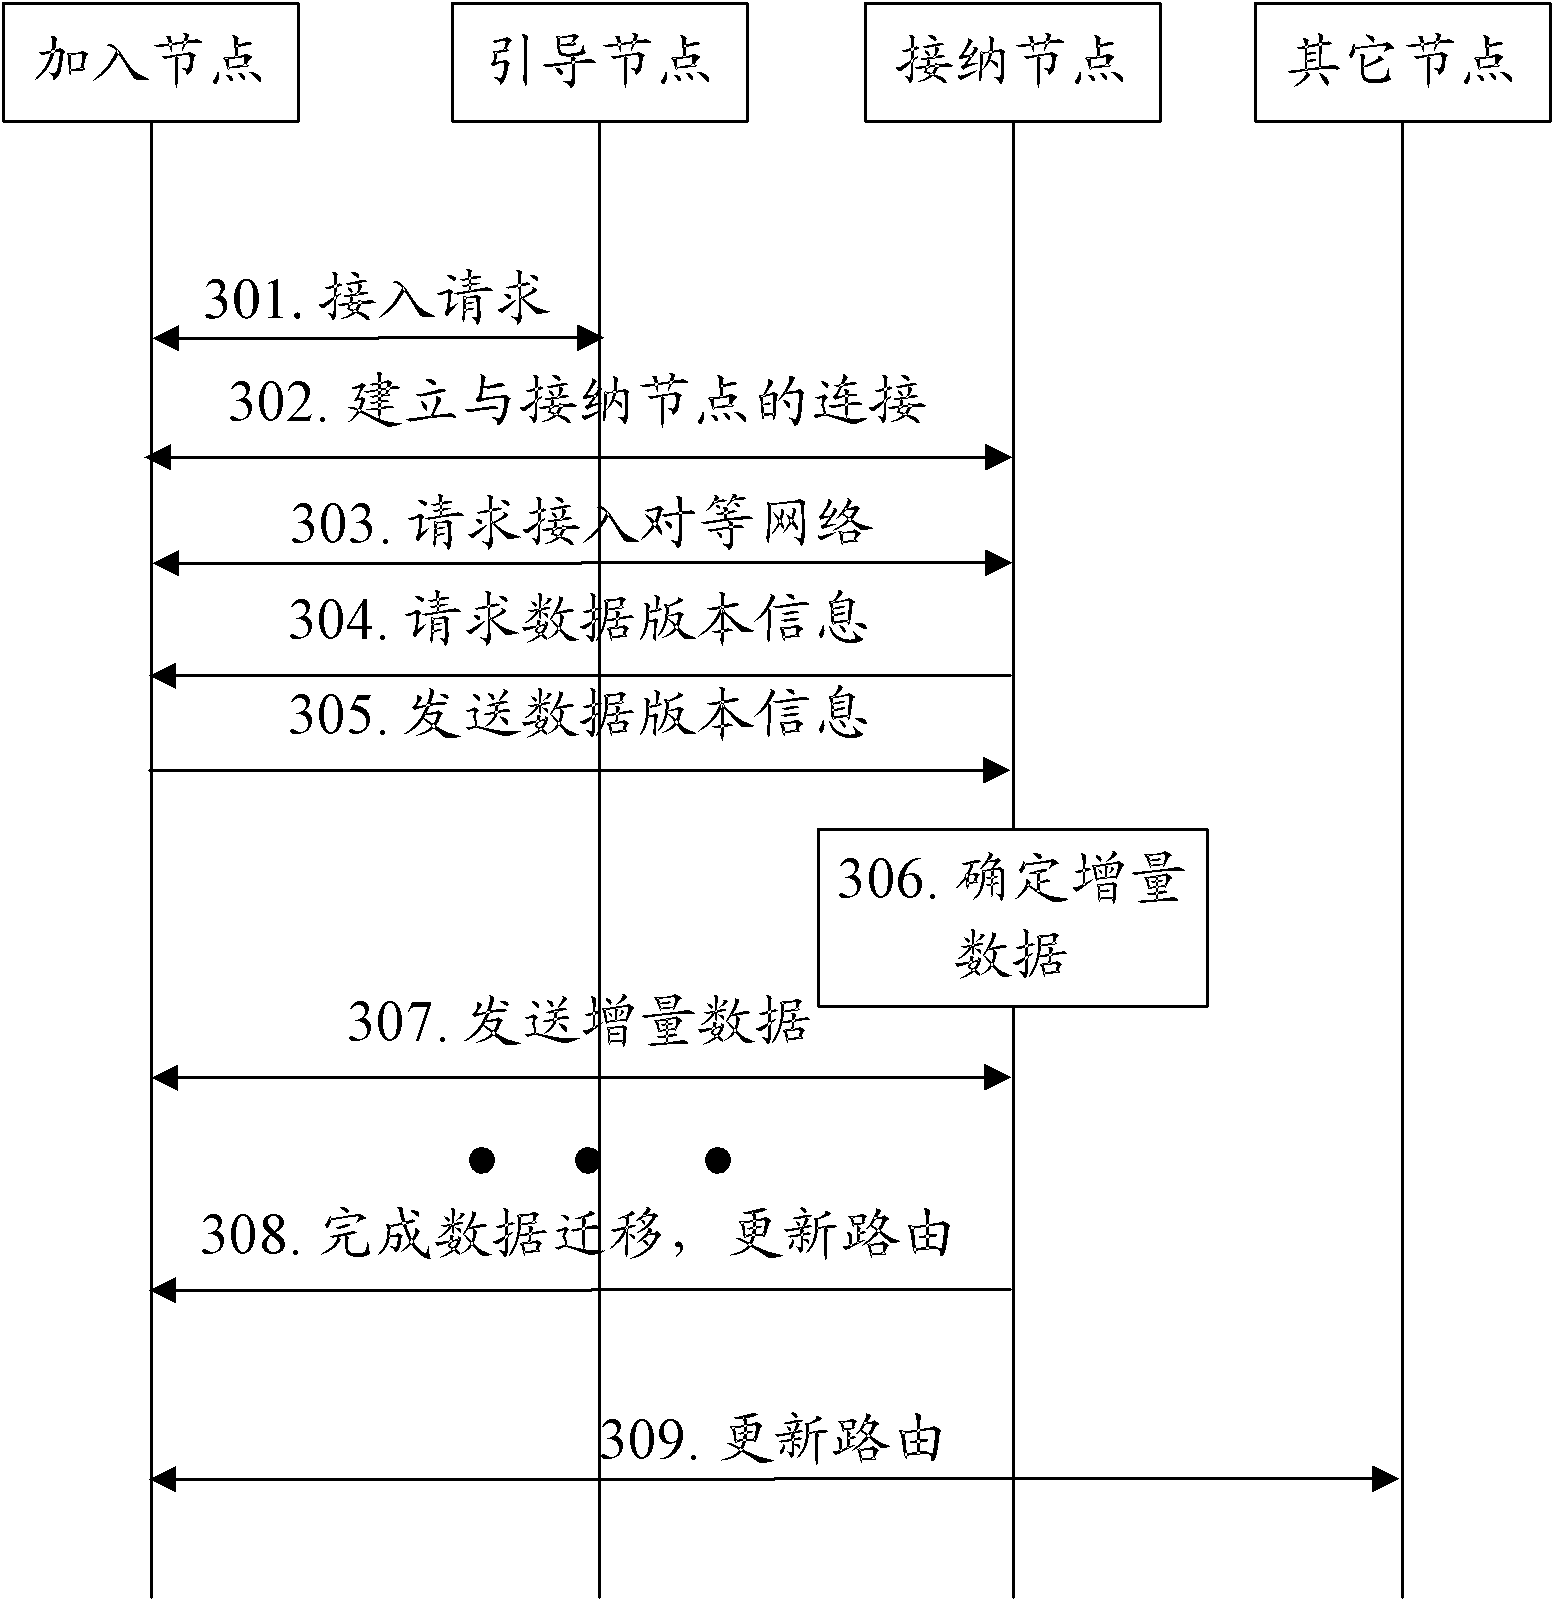 Method and system for data migration in peer-to-peer network